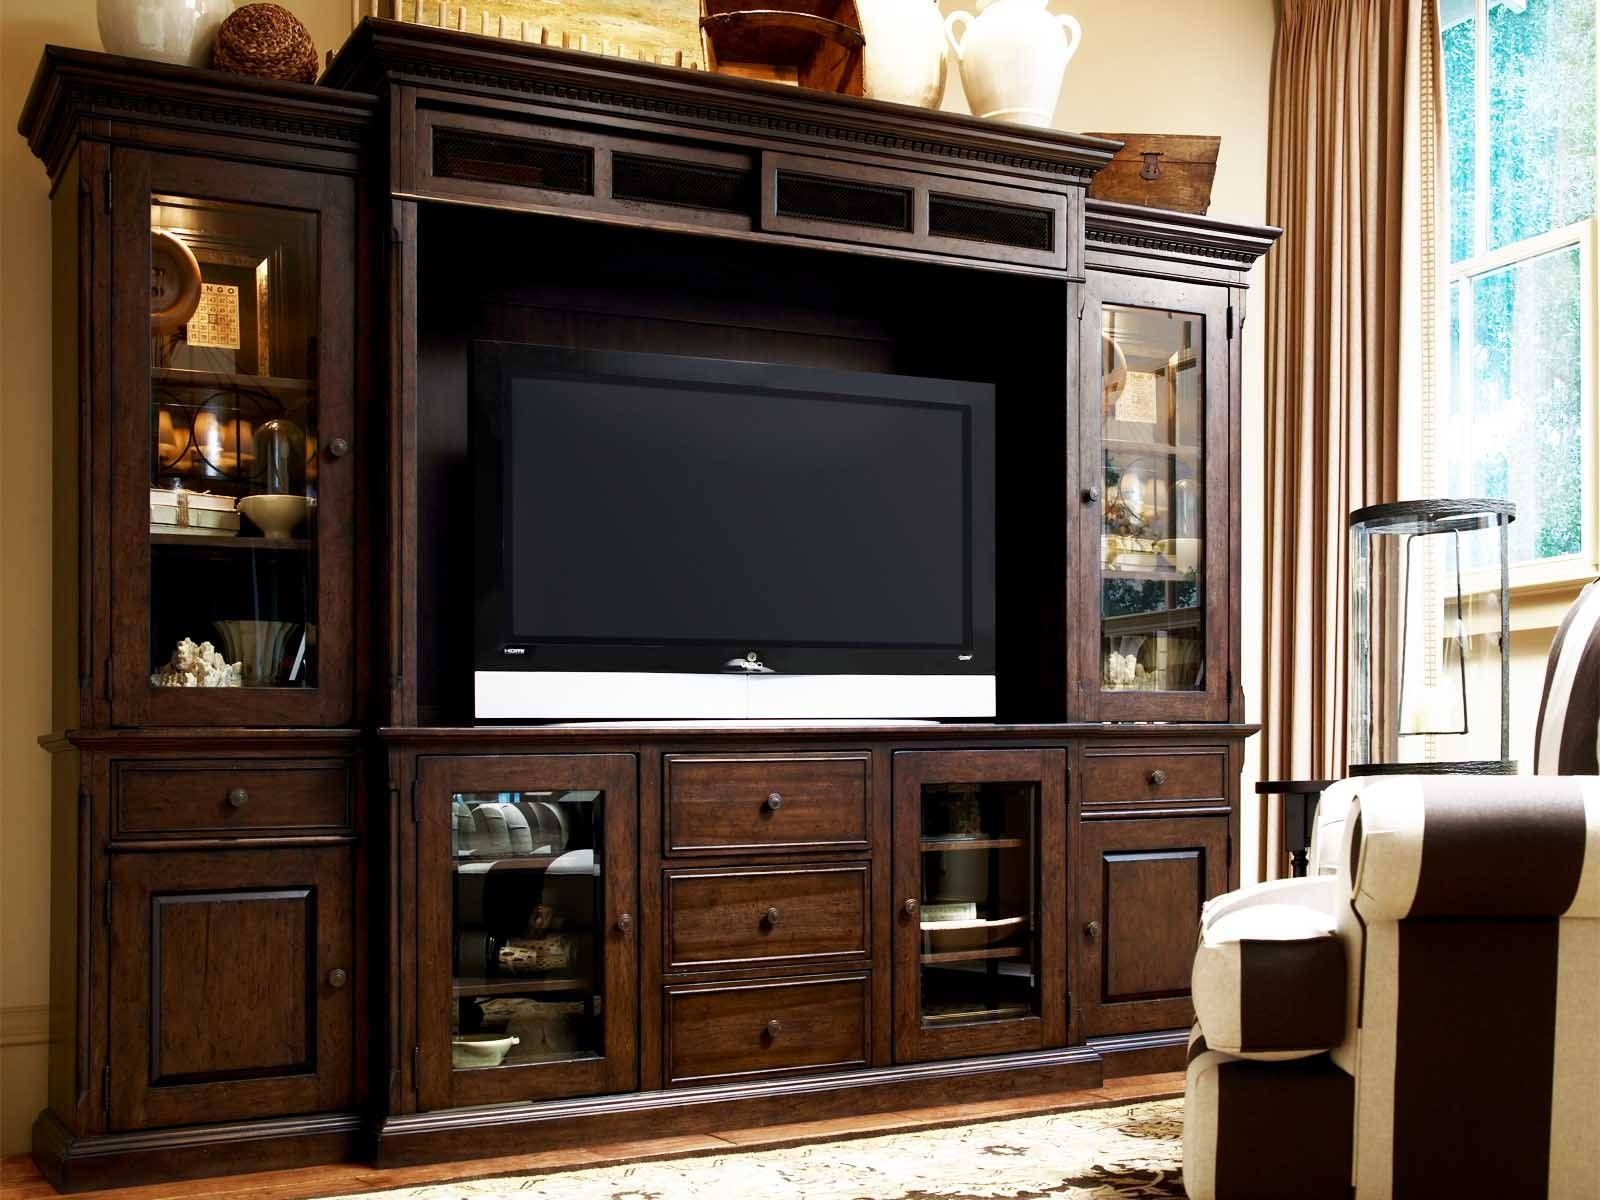 Excellent Polished Wood Enclosed Tv Cabinets For Flat Screens With In Enclosed Tv Cabinets With Doors (View 14 of 15)